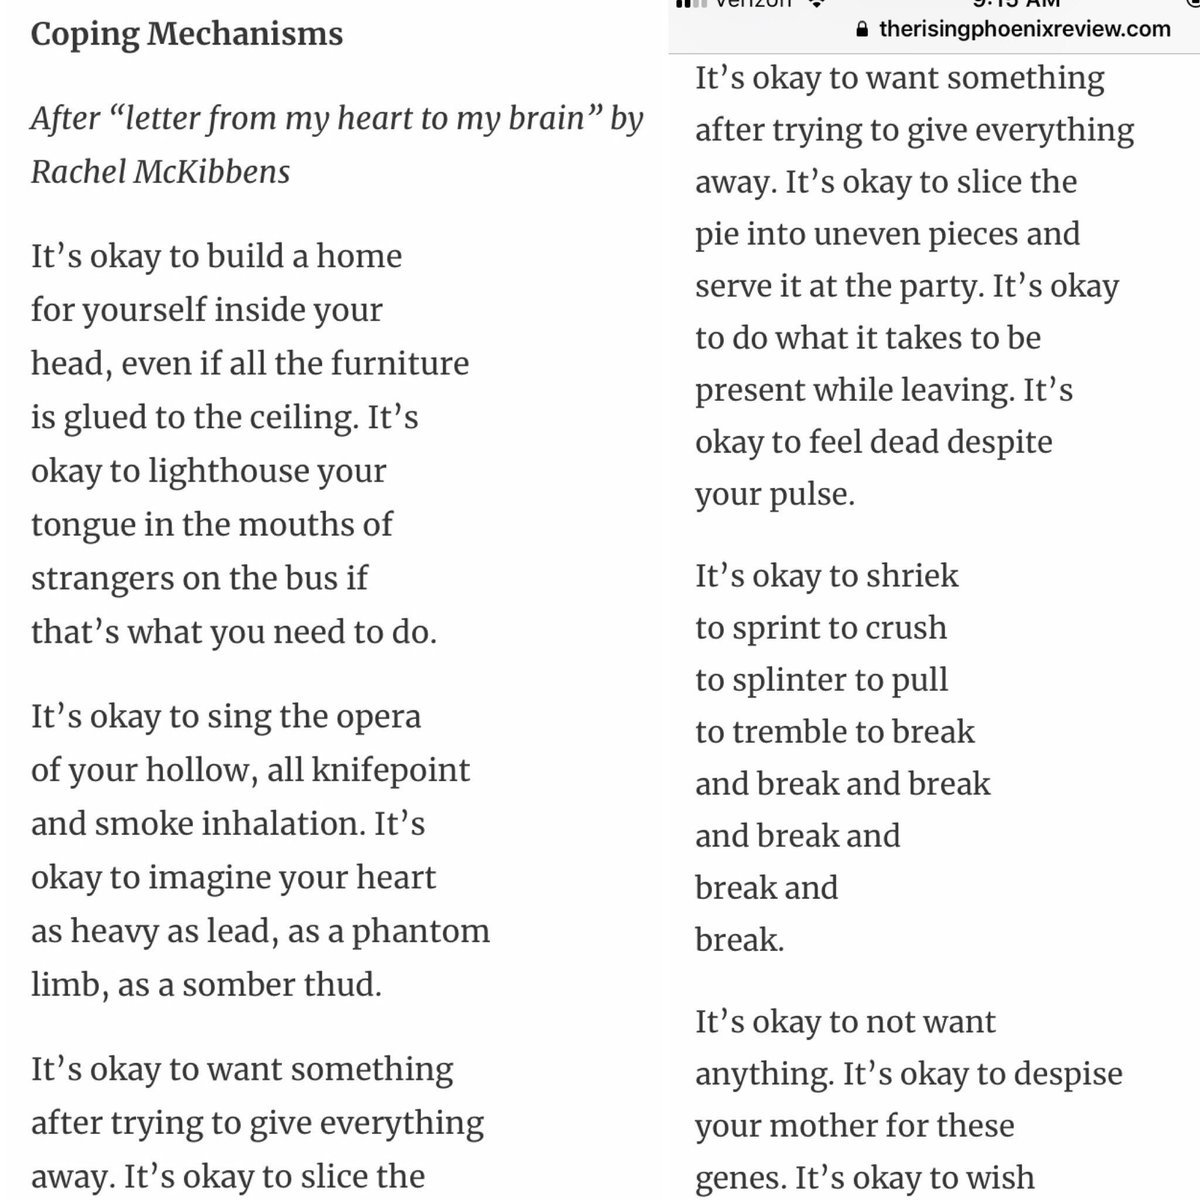 NOTE: this poem was taken down, but I knew to screengrab it. Before it vanished, the “after Rachel McKibbens” was changed to mention the actual poem. This one she didn’t even cop to in her email to me: